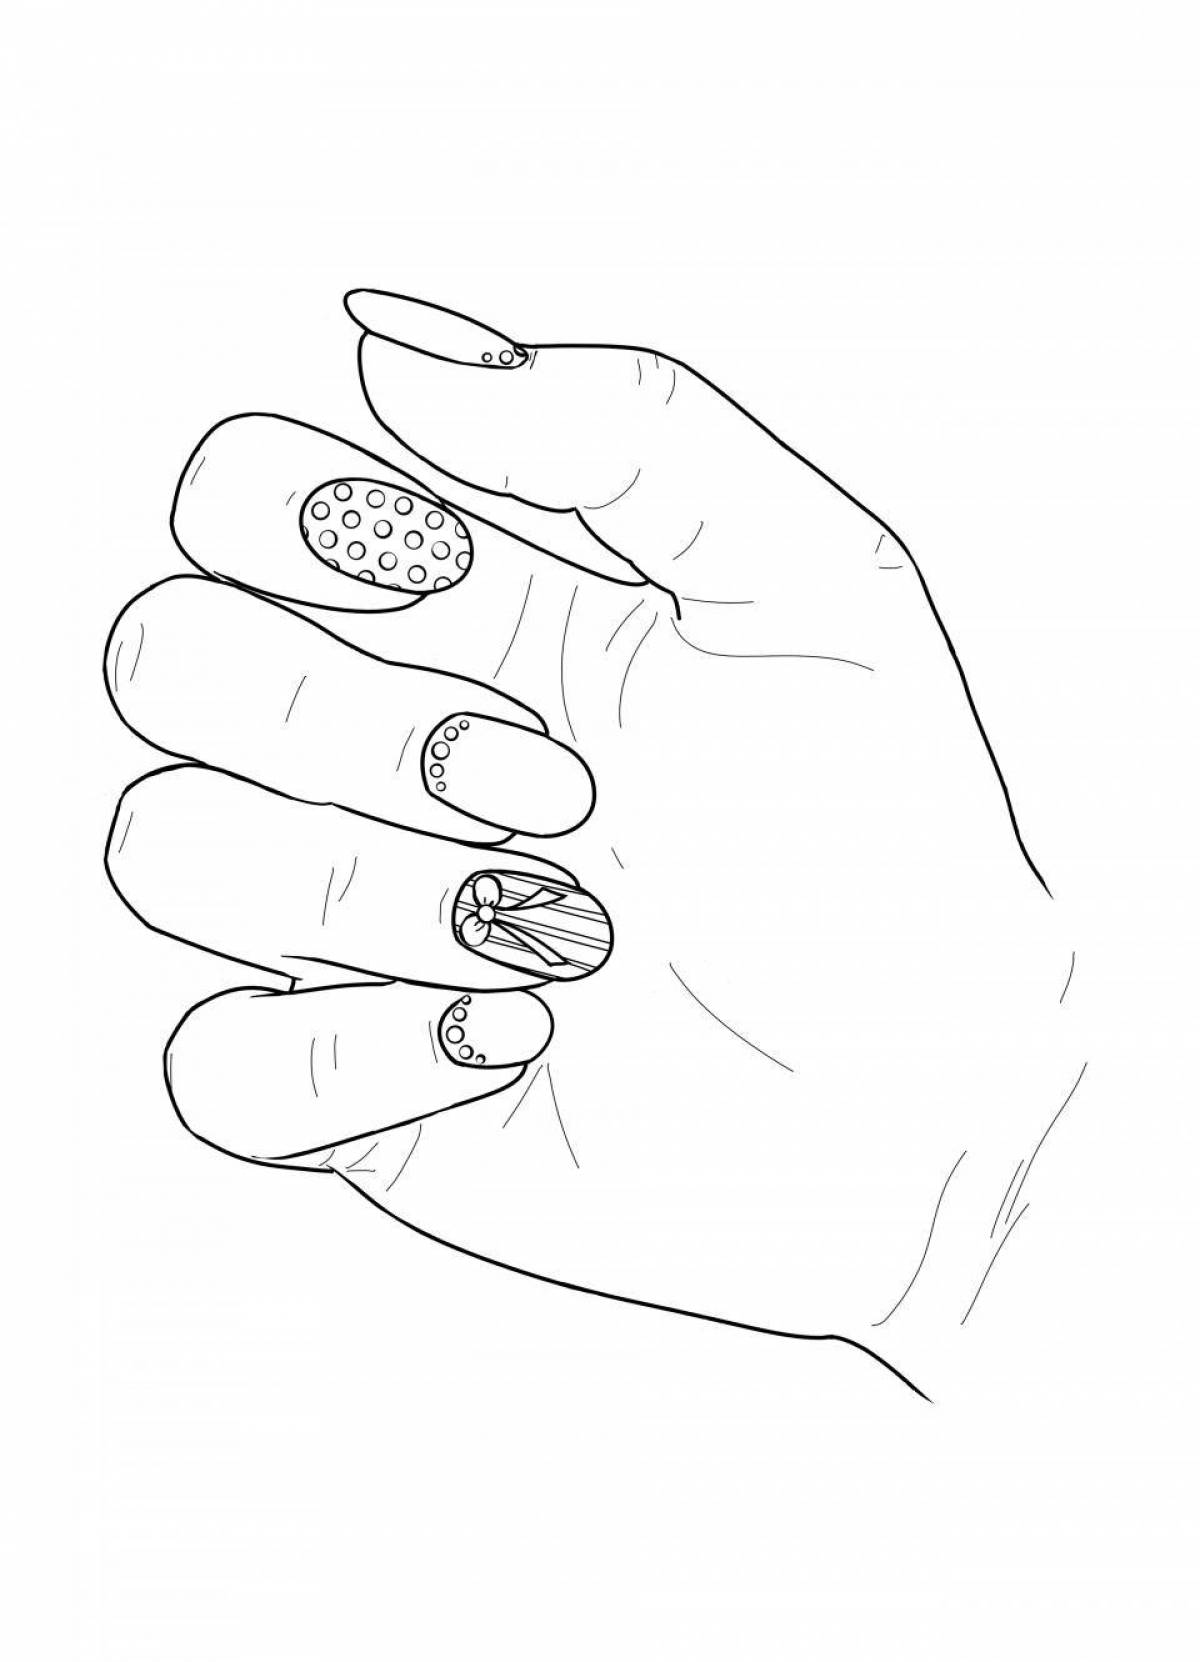 Coloring pages with long nails for girls